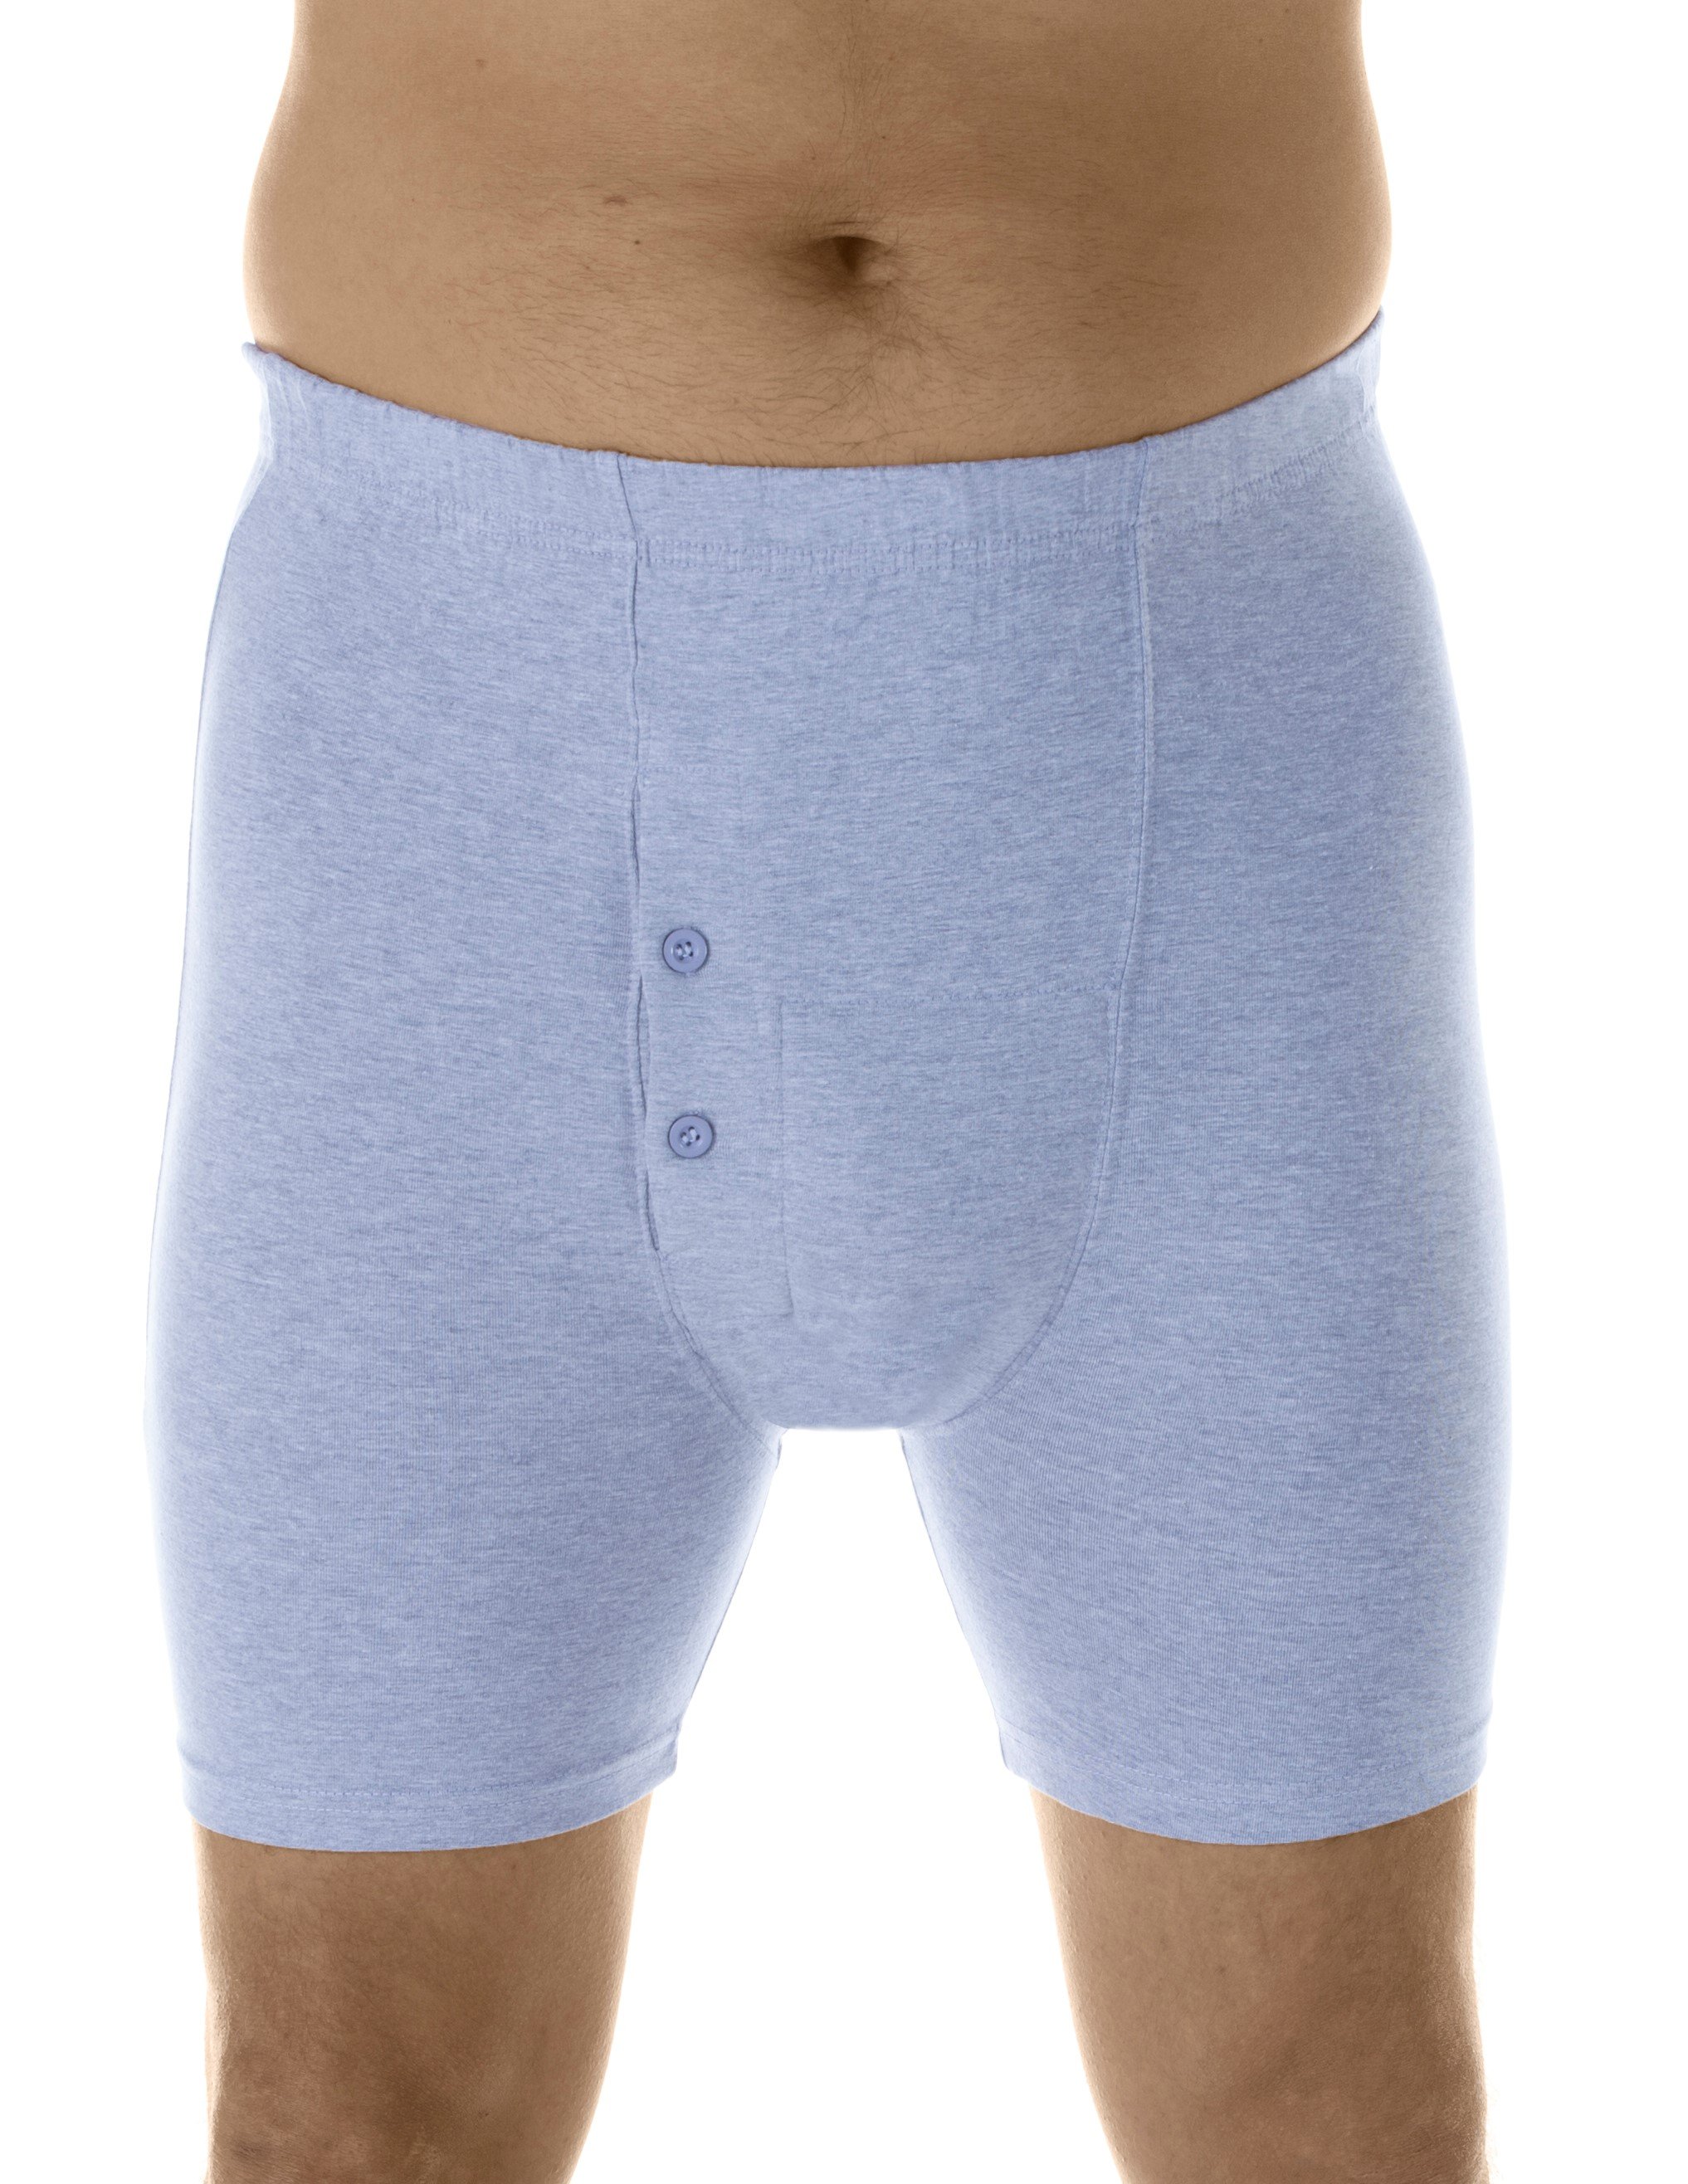 5 Types of Washable Incontinence Underwear for Men